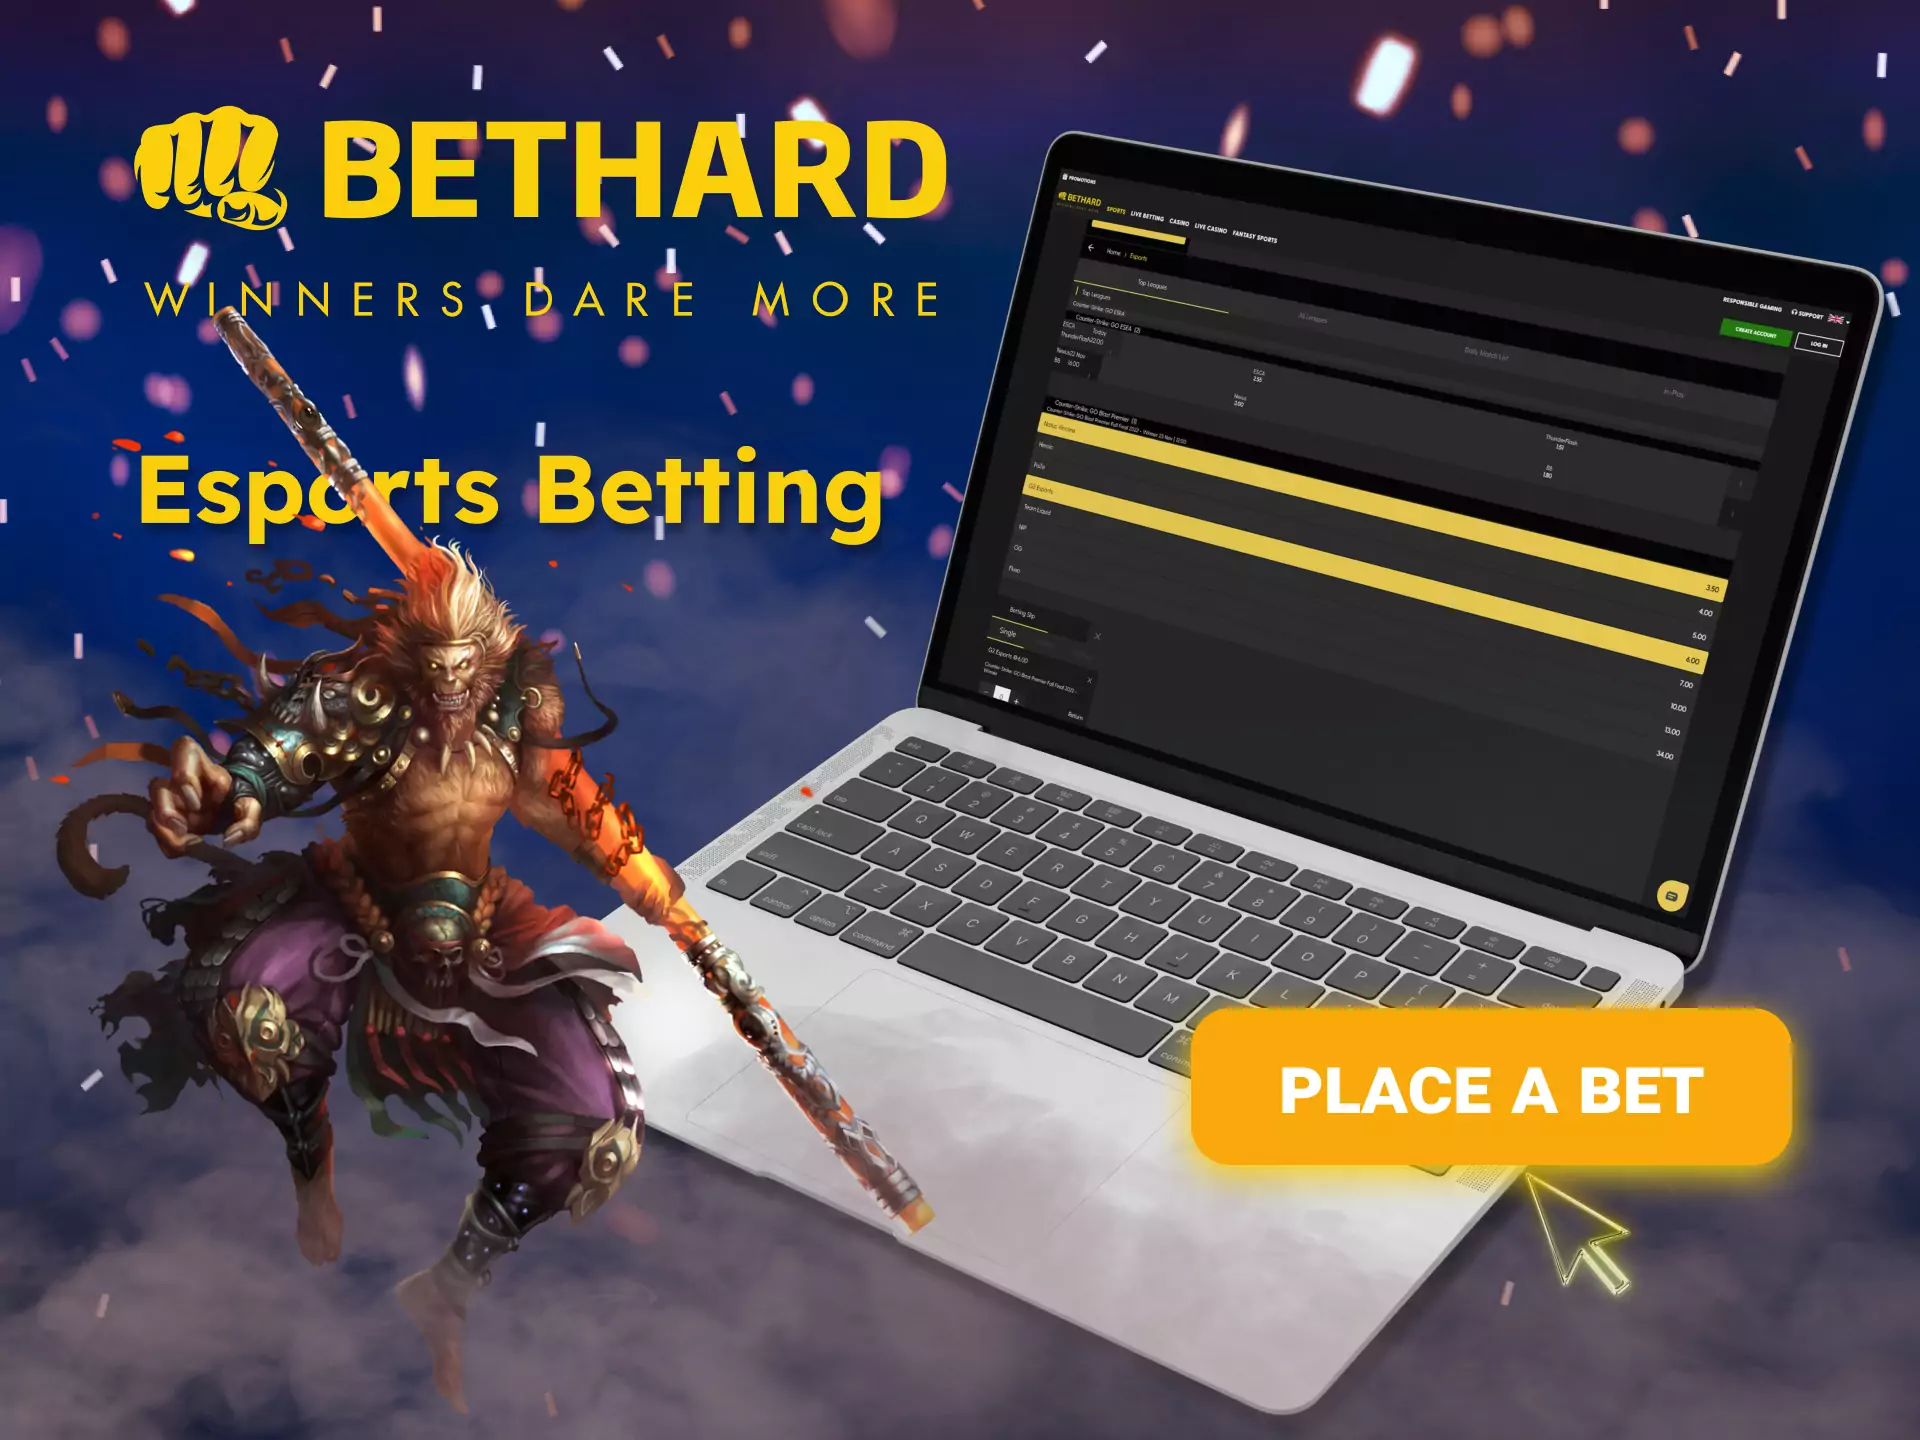 If you are an esports fan, then bet on your favorite teams with Bethard.